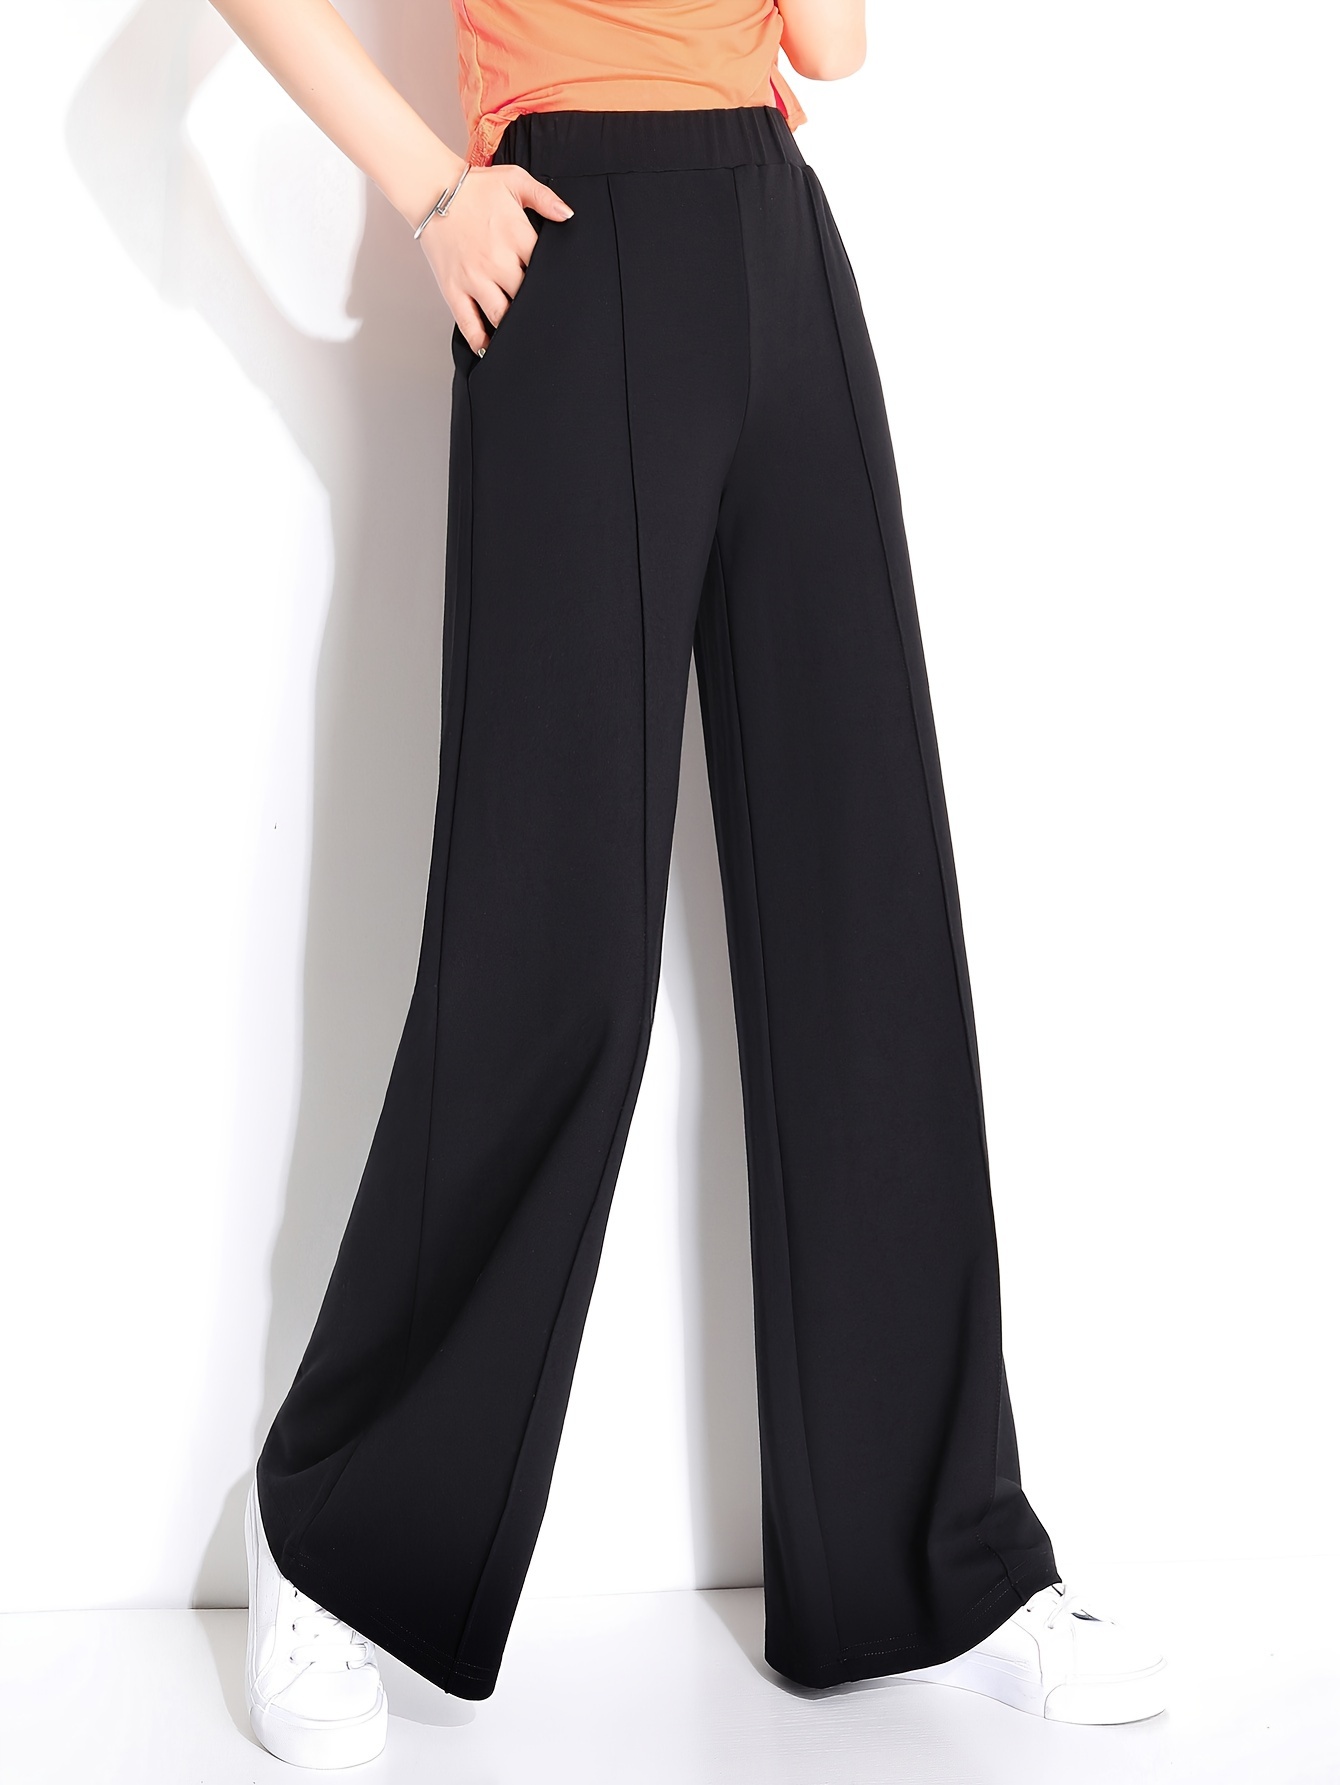 Casual Straight Leg Sweatpants, Stretch Elastic Waist Wide Leg Pants,  Comfortable Loose Jogging Pants With Pockets For Women